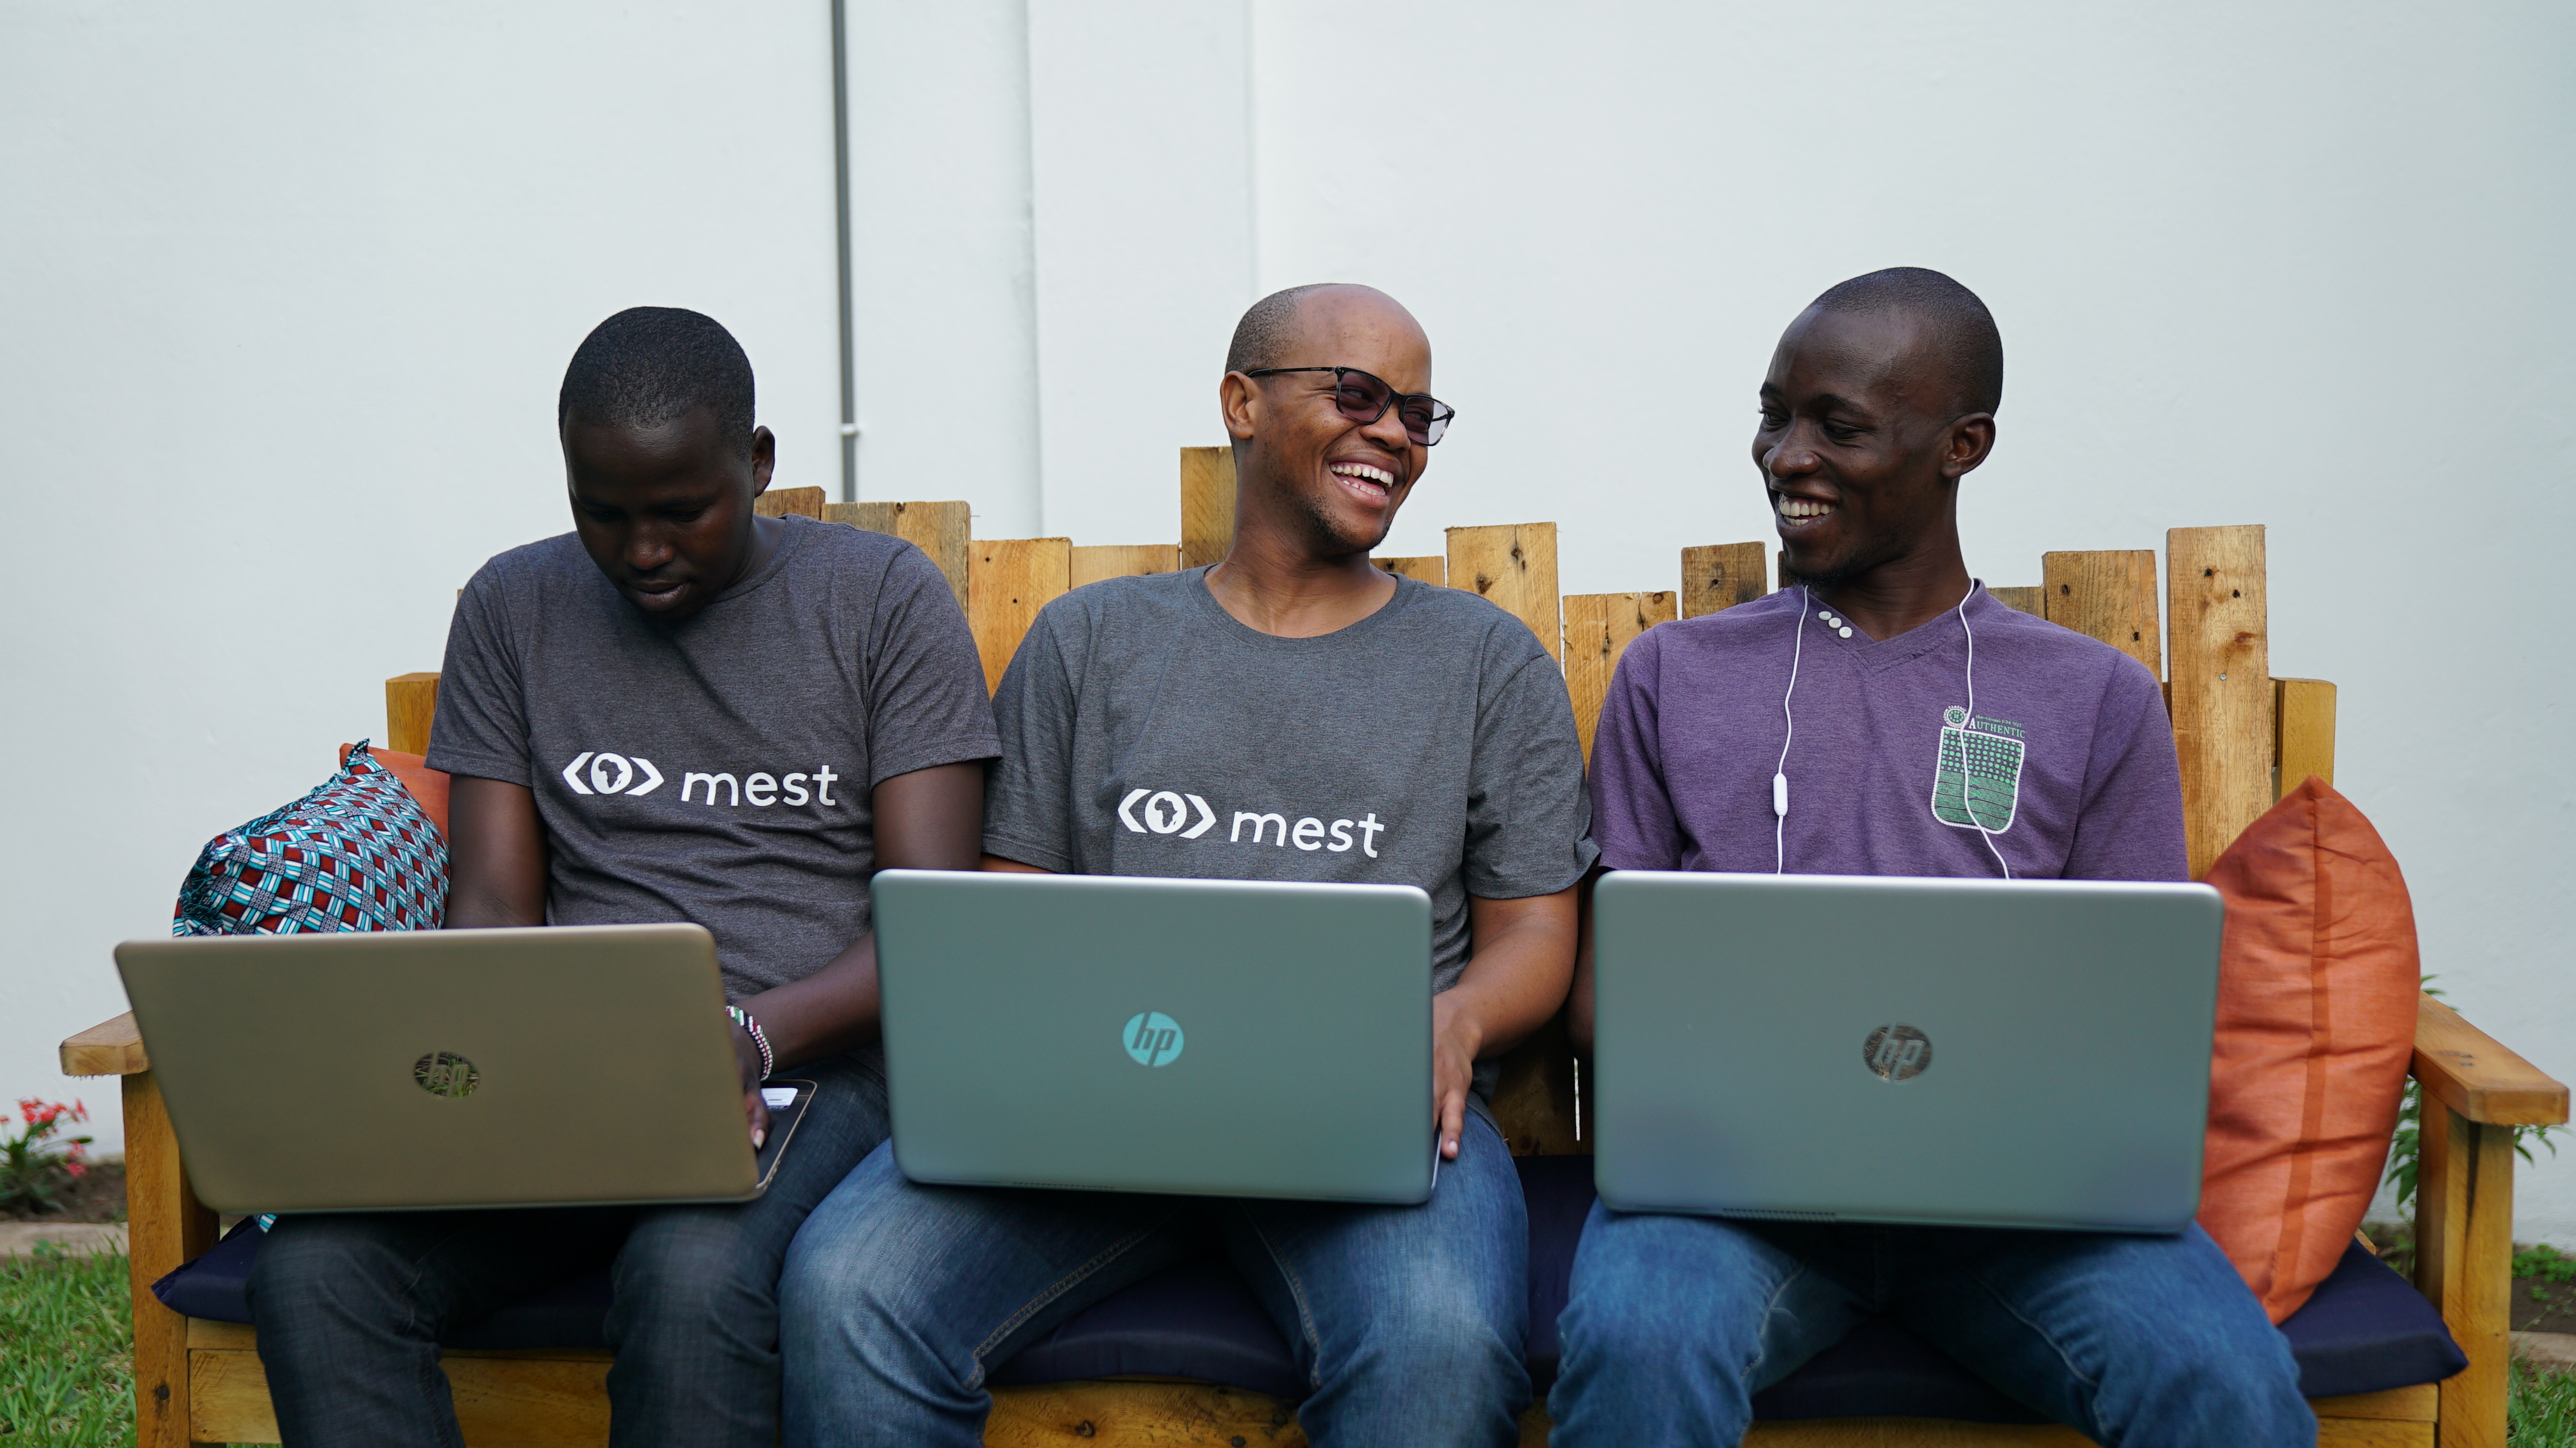 Africa Roundup: MEST, Airbus and Microsoft expand in Africa, while Afrostream shutters